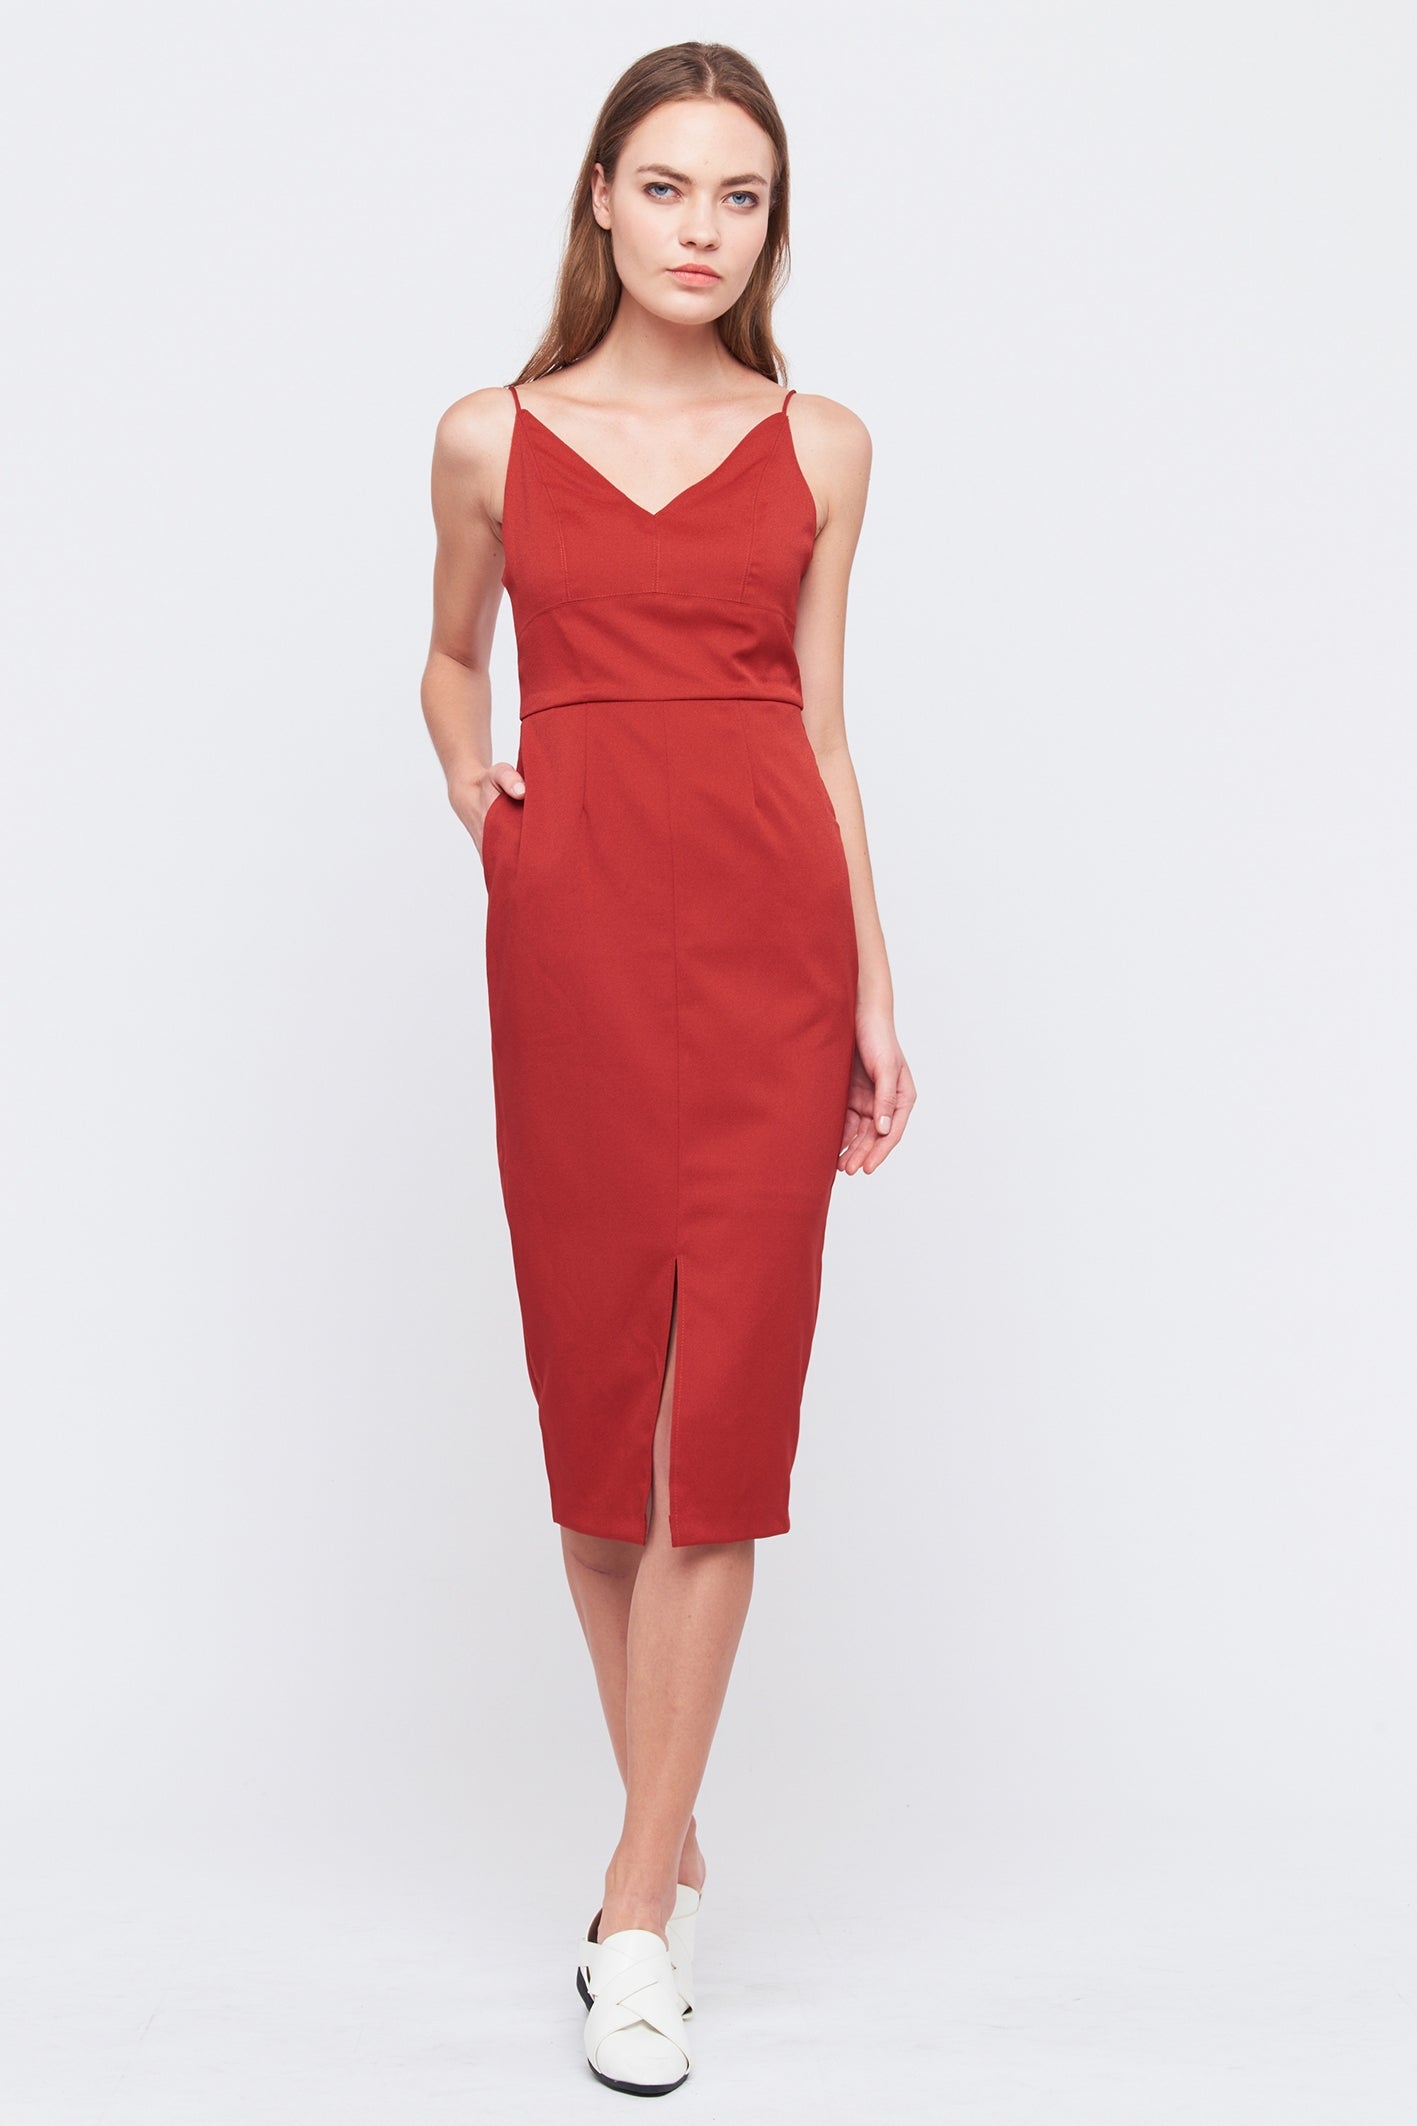 Sleeveless Tailored Dress In Red